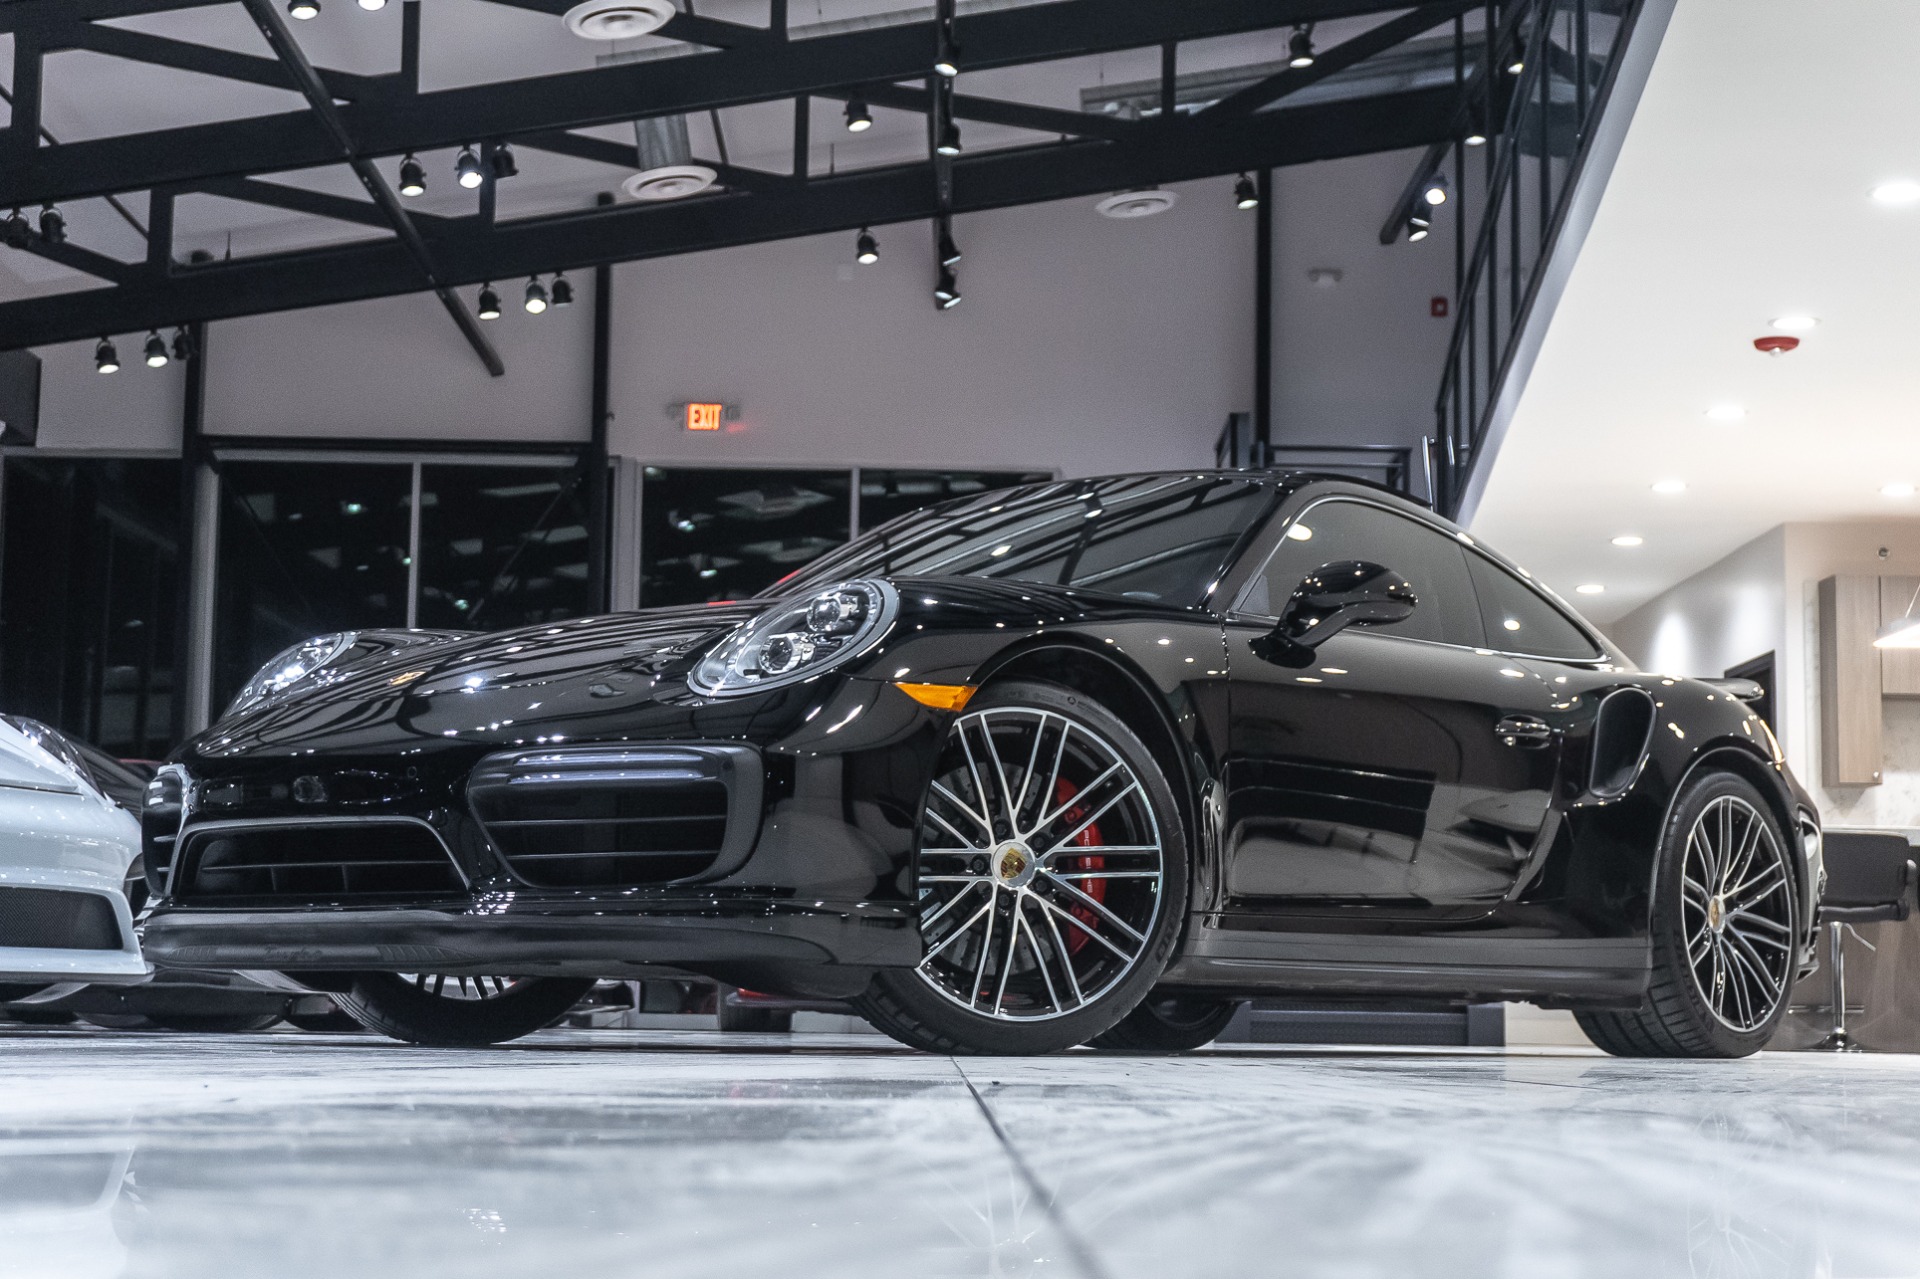 Used-2019-Porsche-911-Turbo-Coupe-MSRP-181K-FRONT-LIFT-BURMESTER-AUDIO